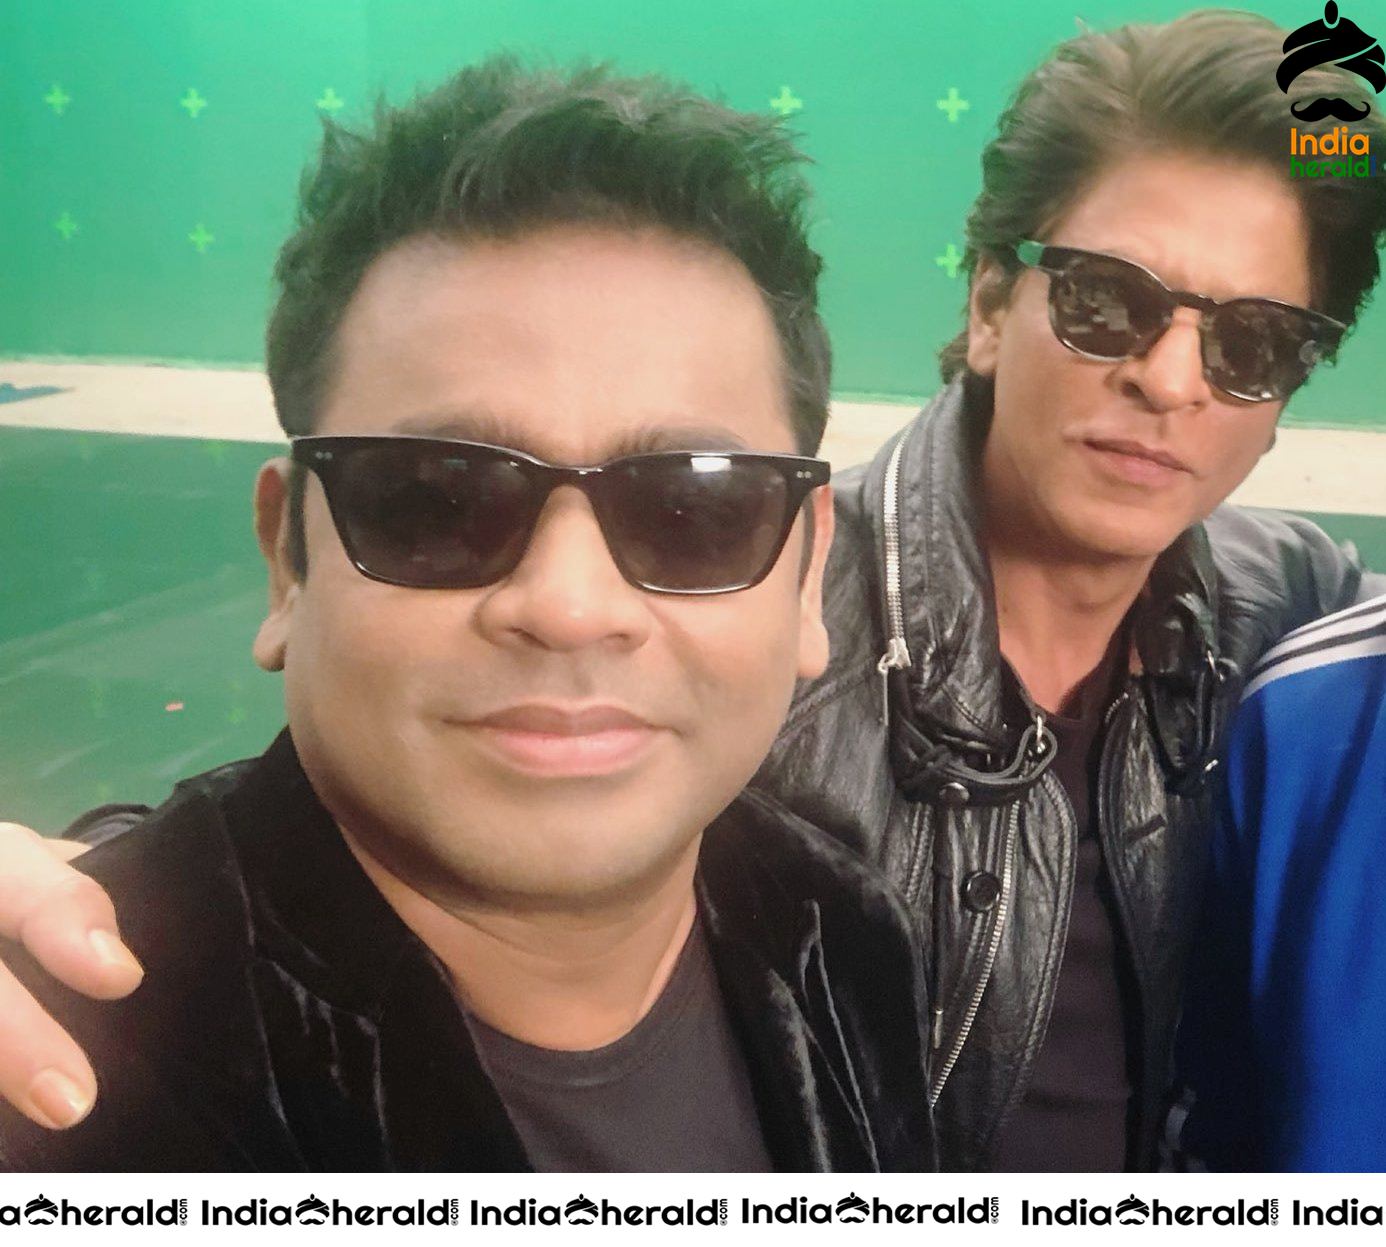 Actor Shah Rukh Khan is seen with A R Rahman and his son A R Ameen